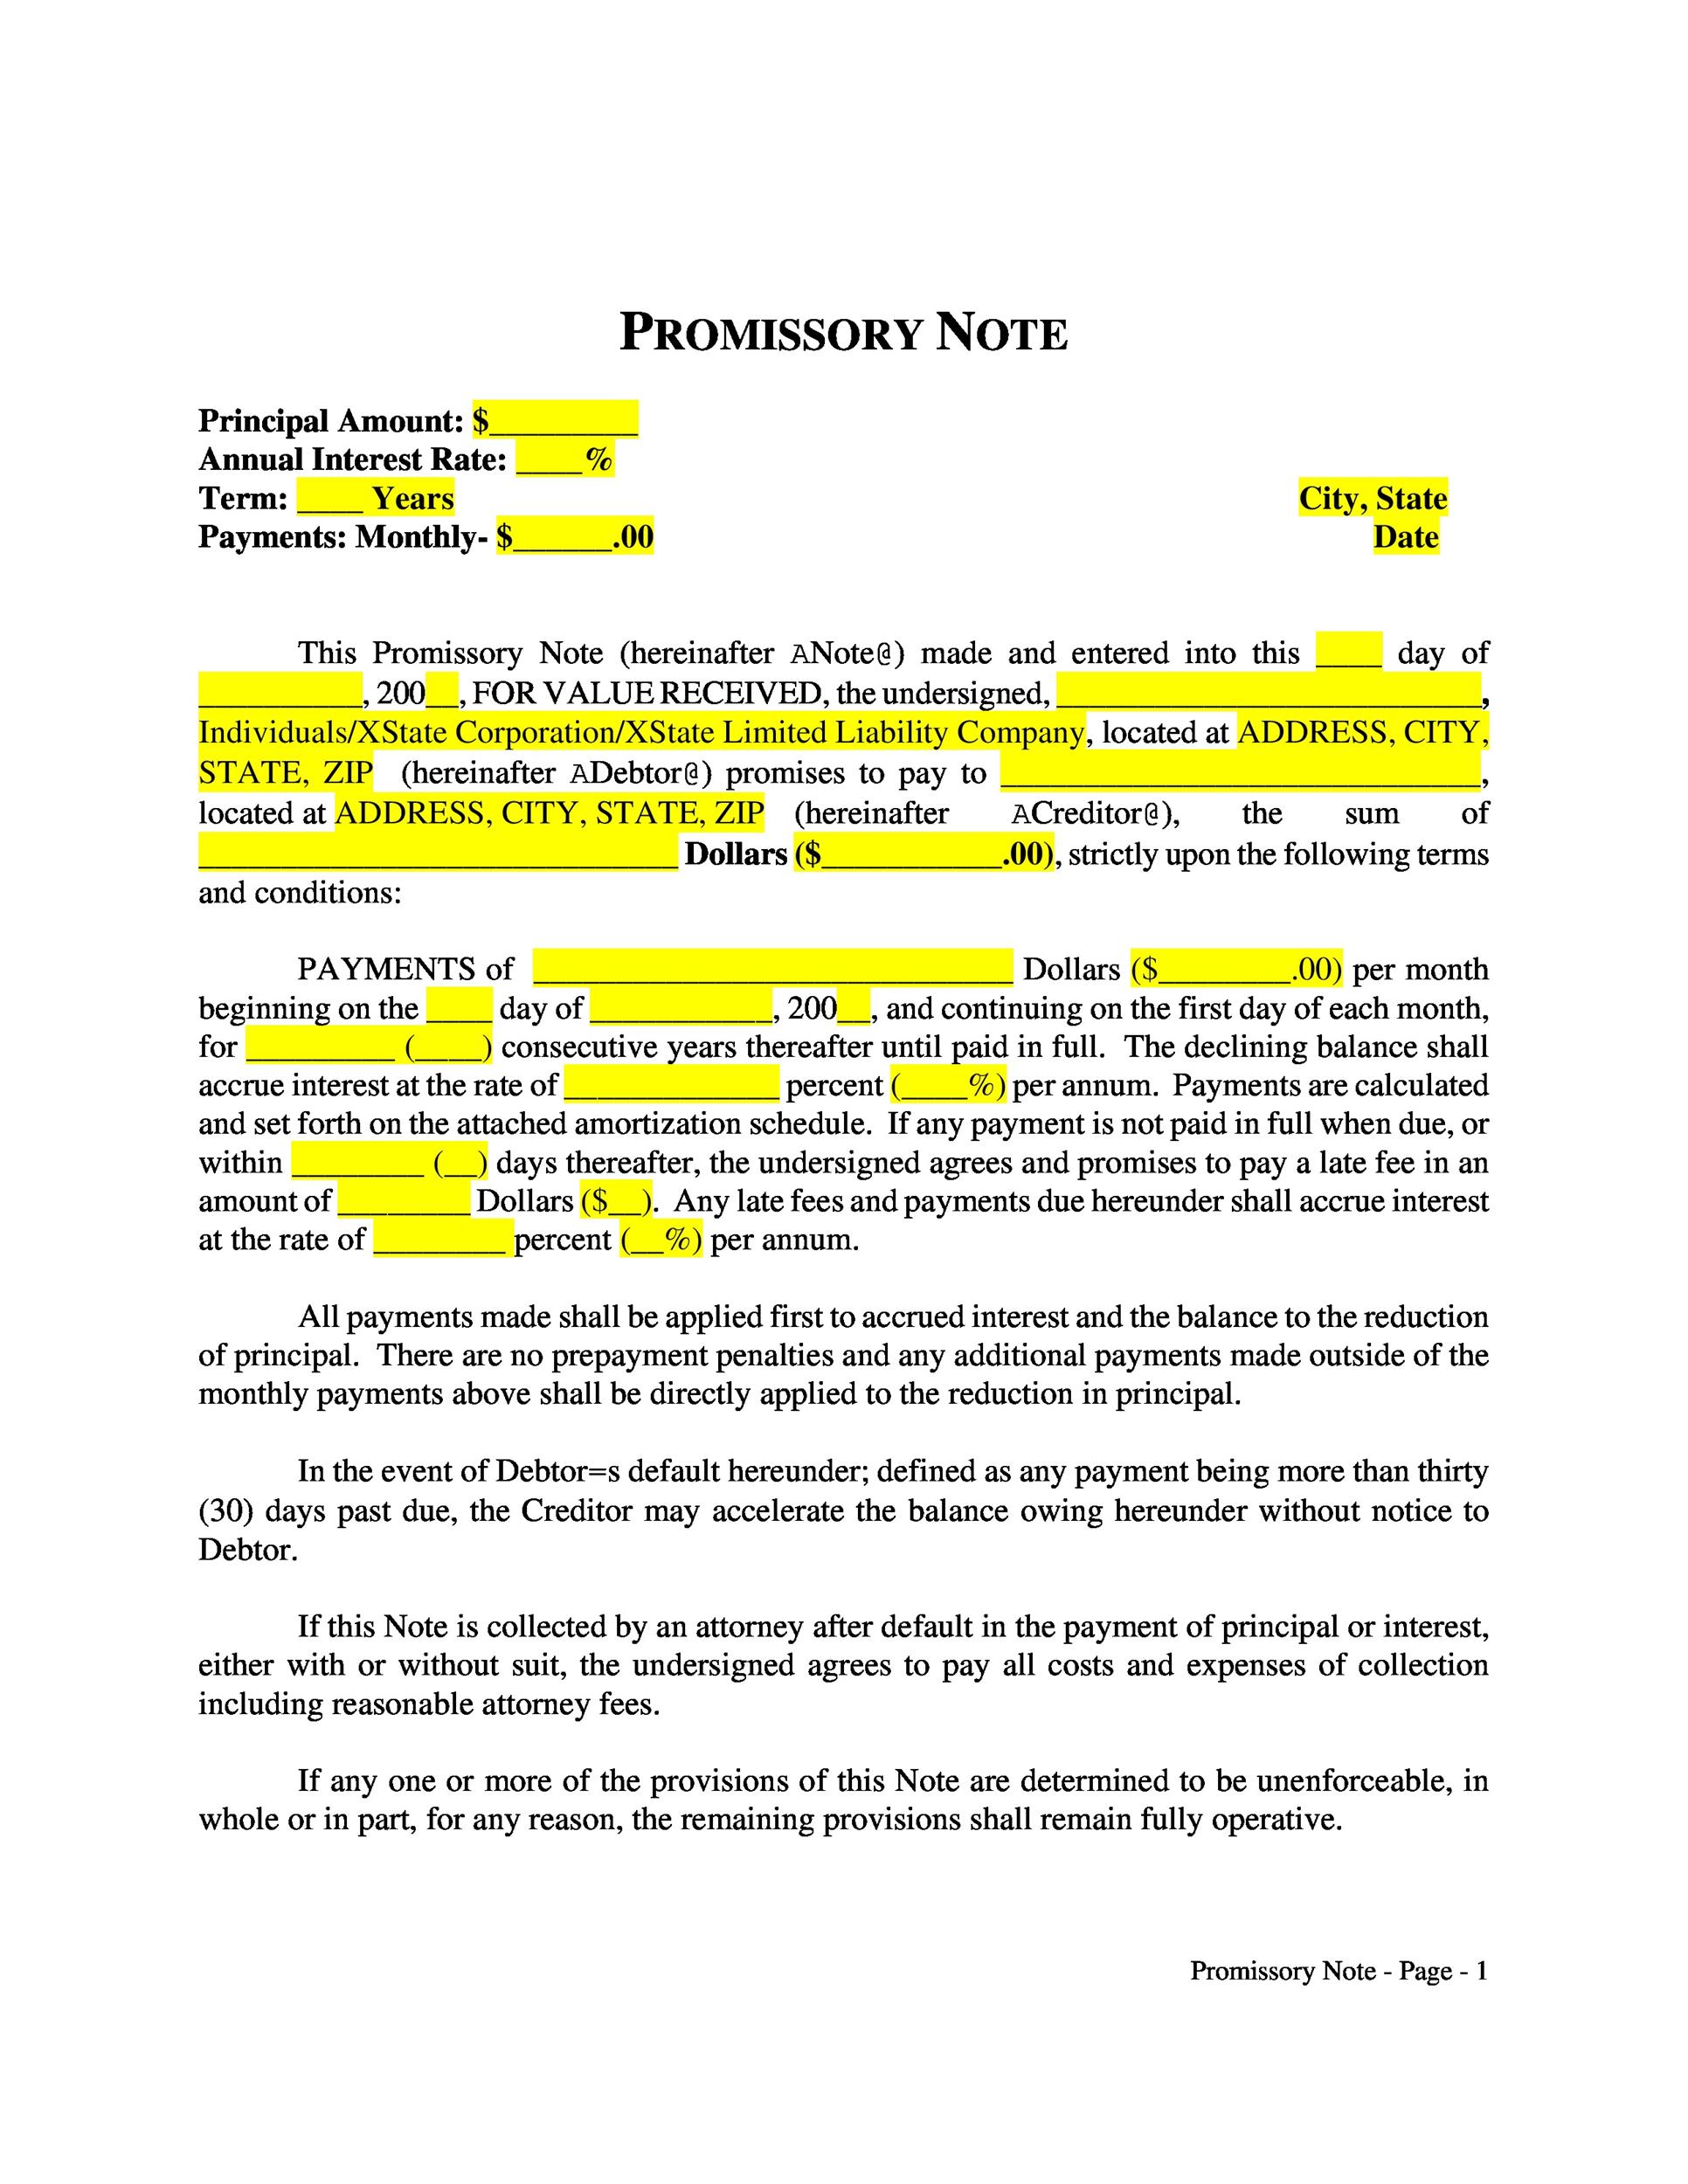 assignment of promissory note